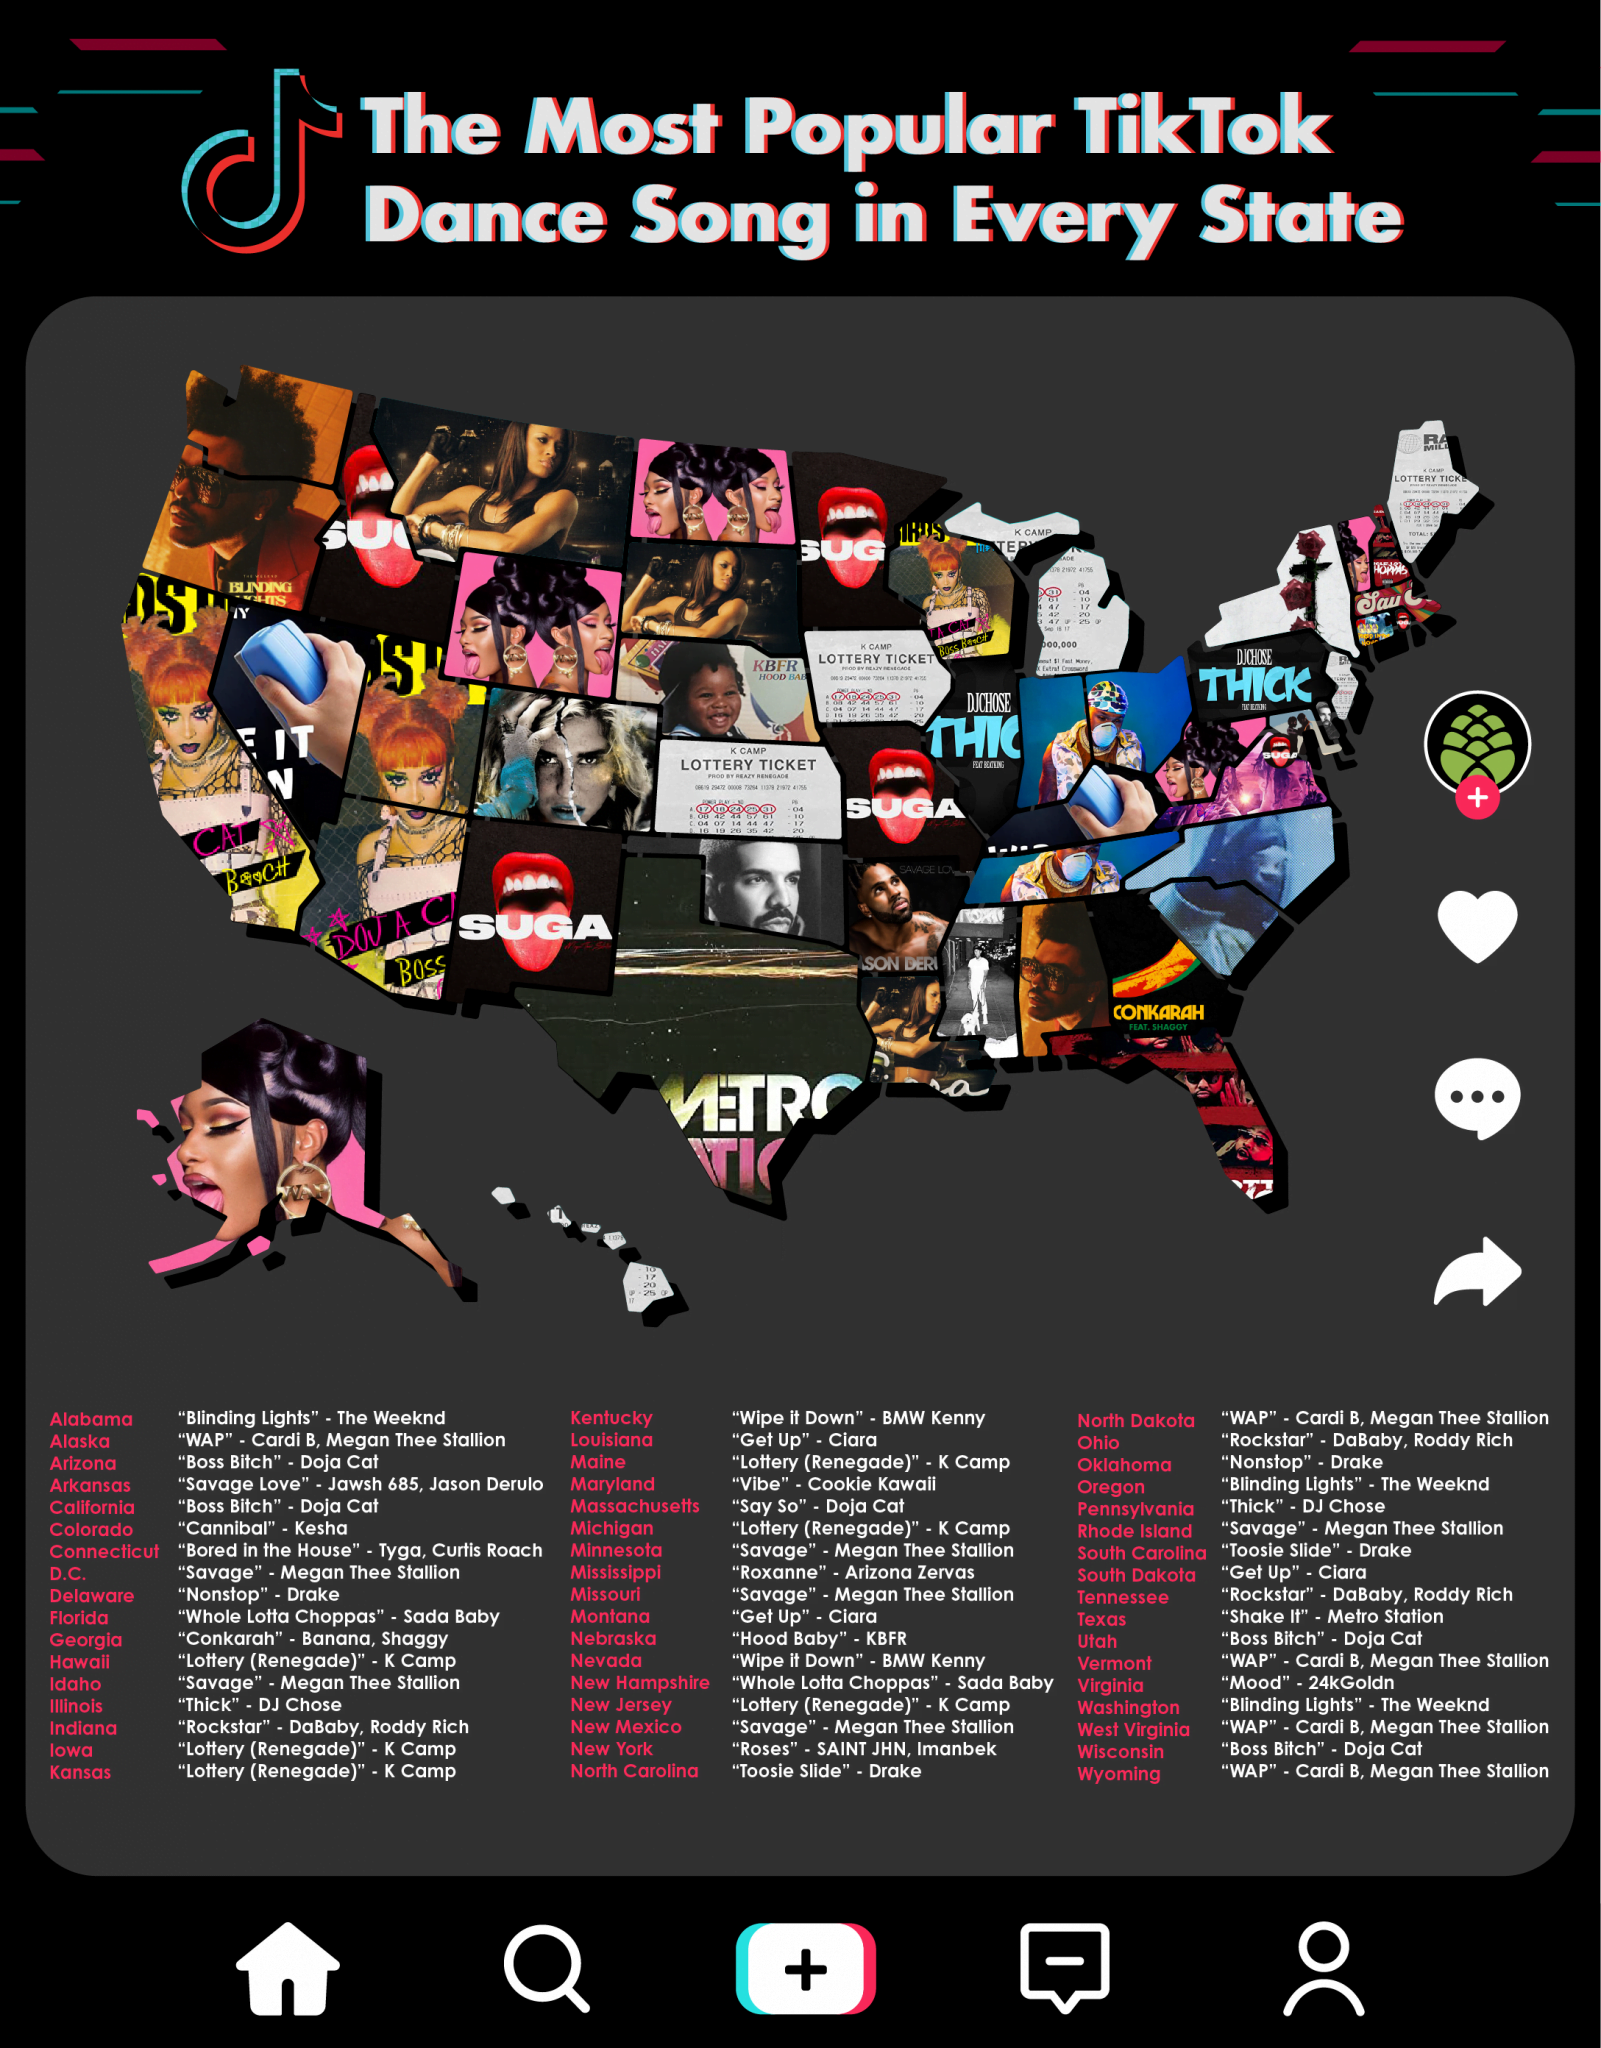 The Most Popular TikTok Dance Song in Every State